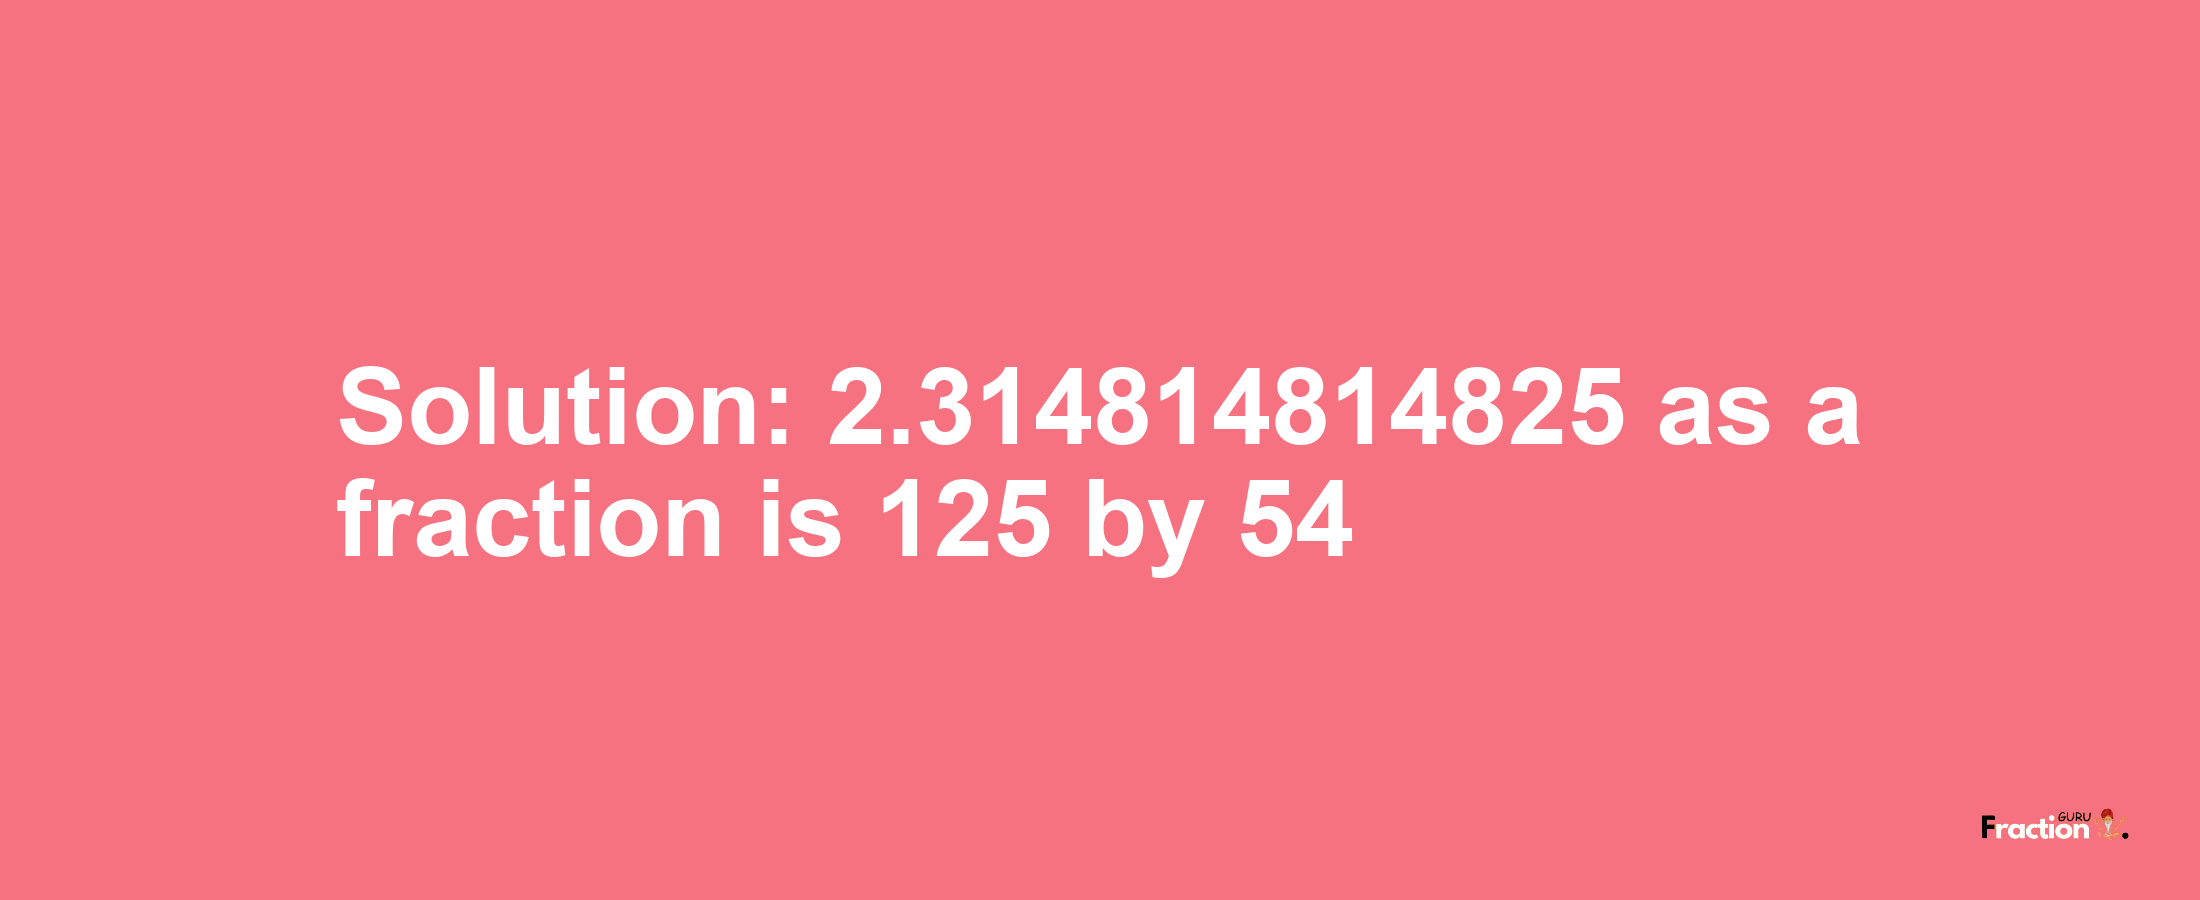 Solution:2.314814814825 as a fraction is 125/54